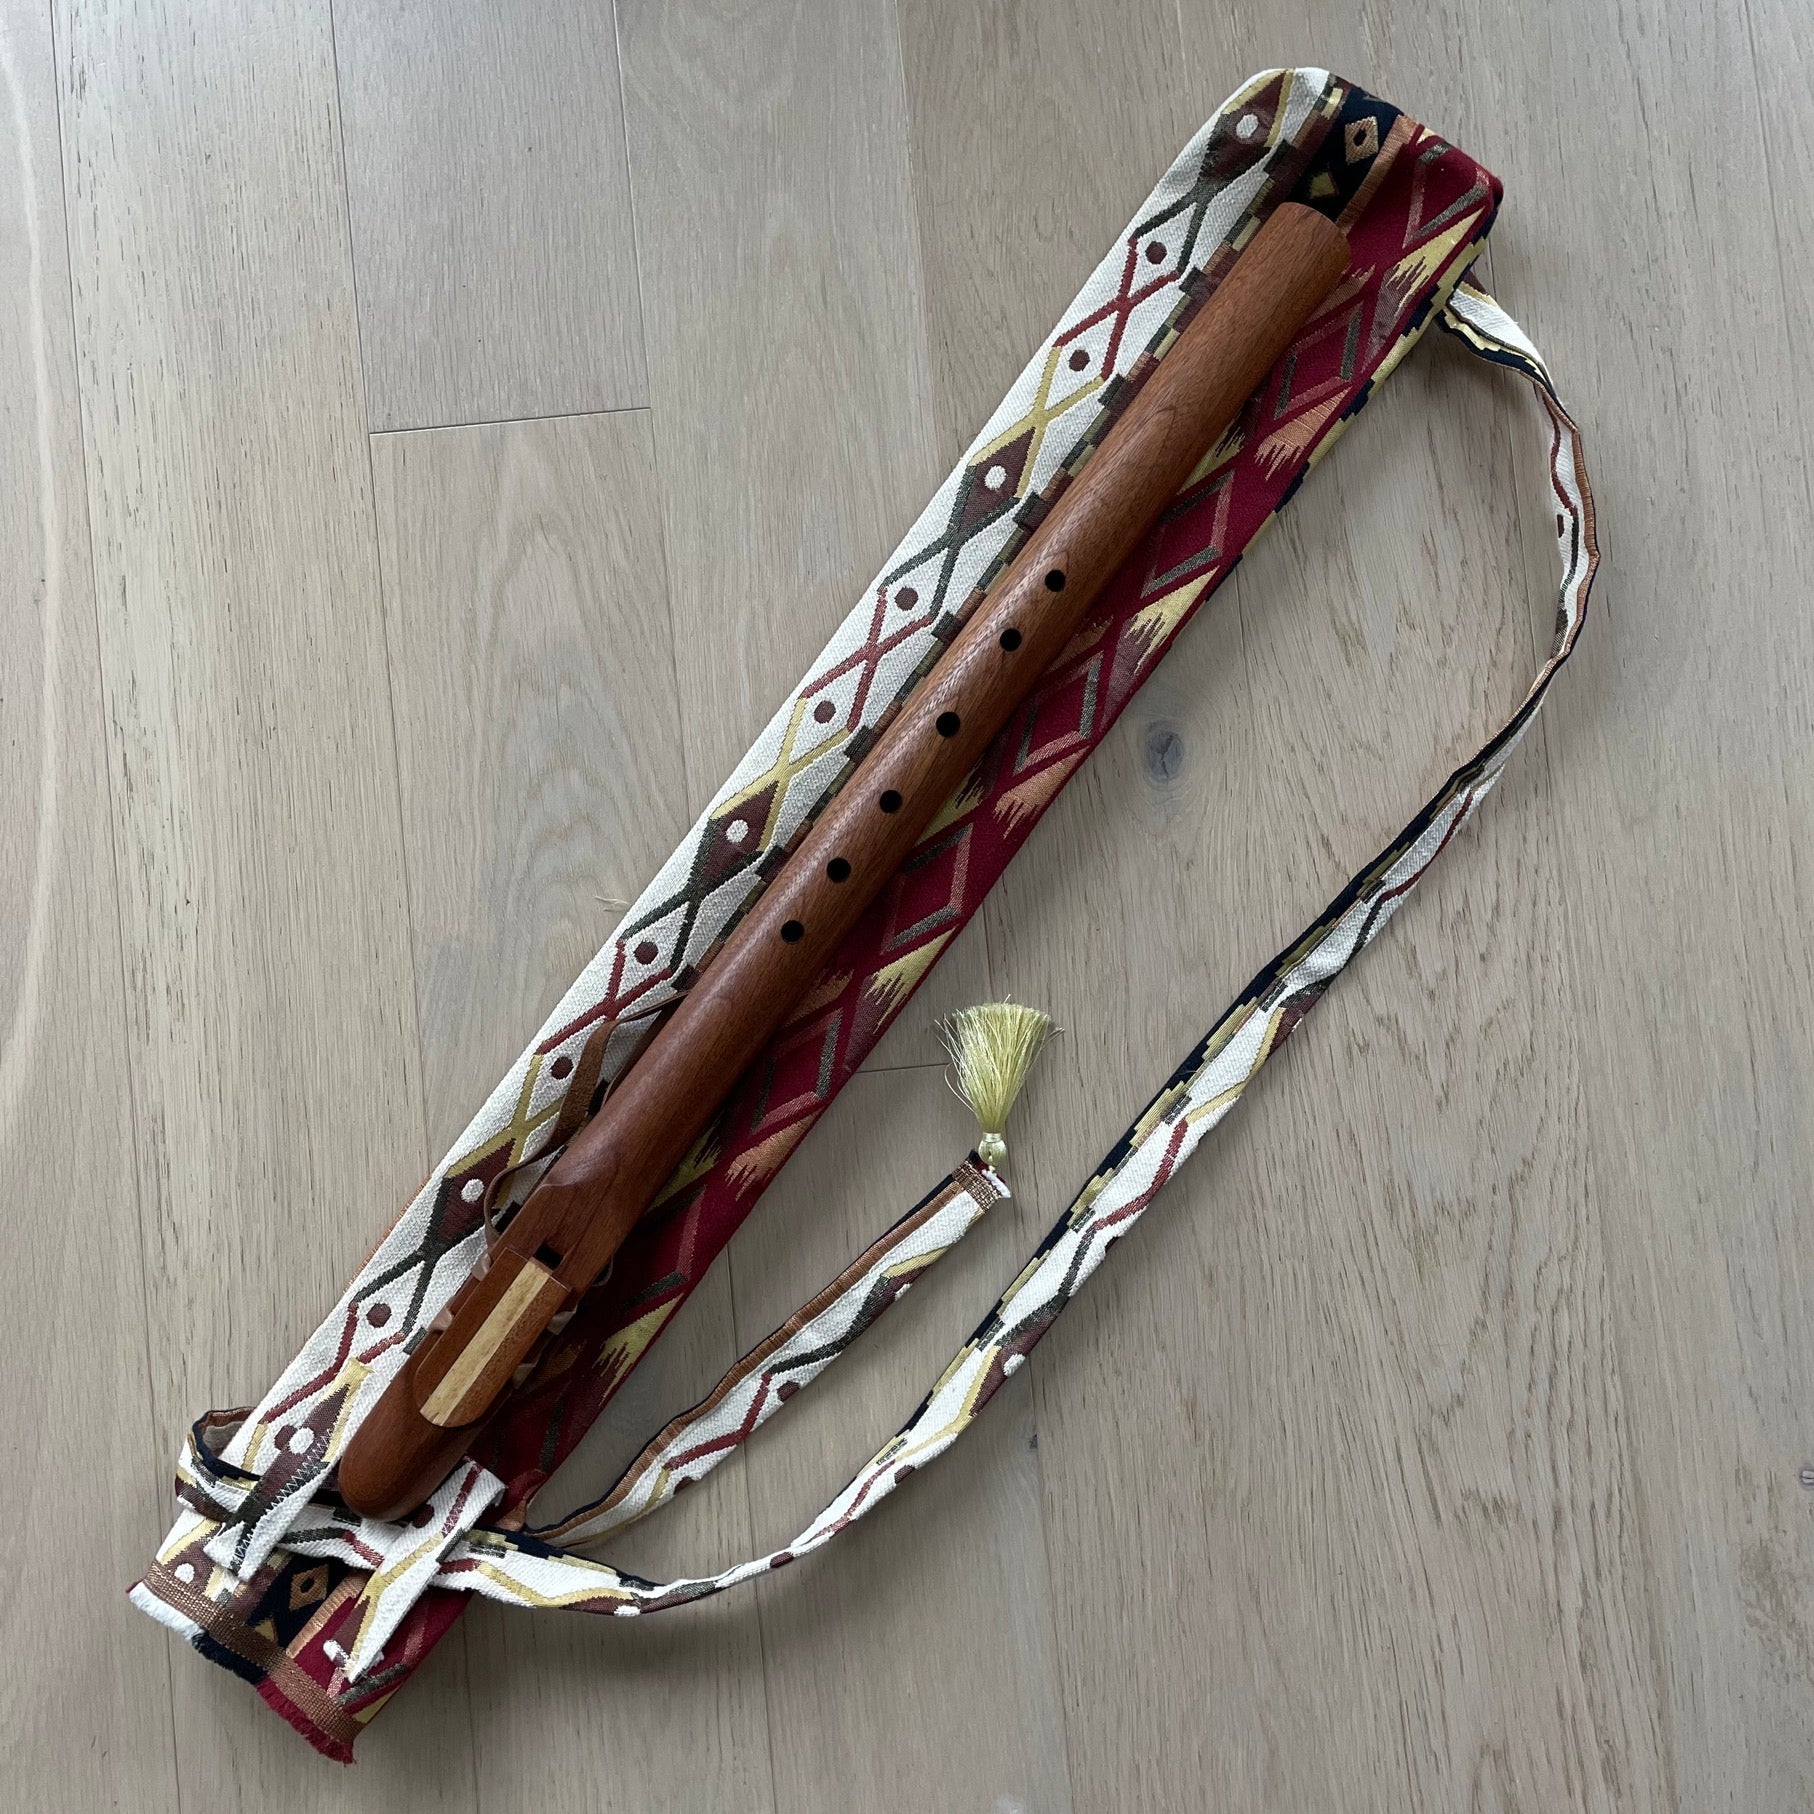 Carrying Flute Bag with Strap for Protection - Flute Bag